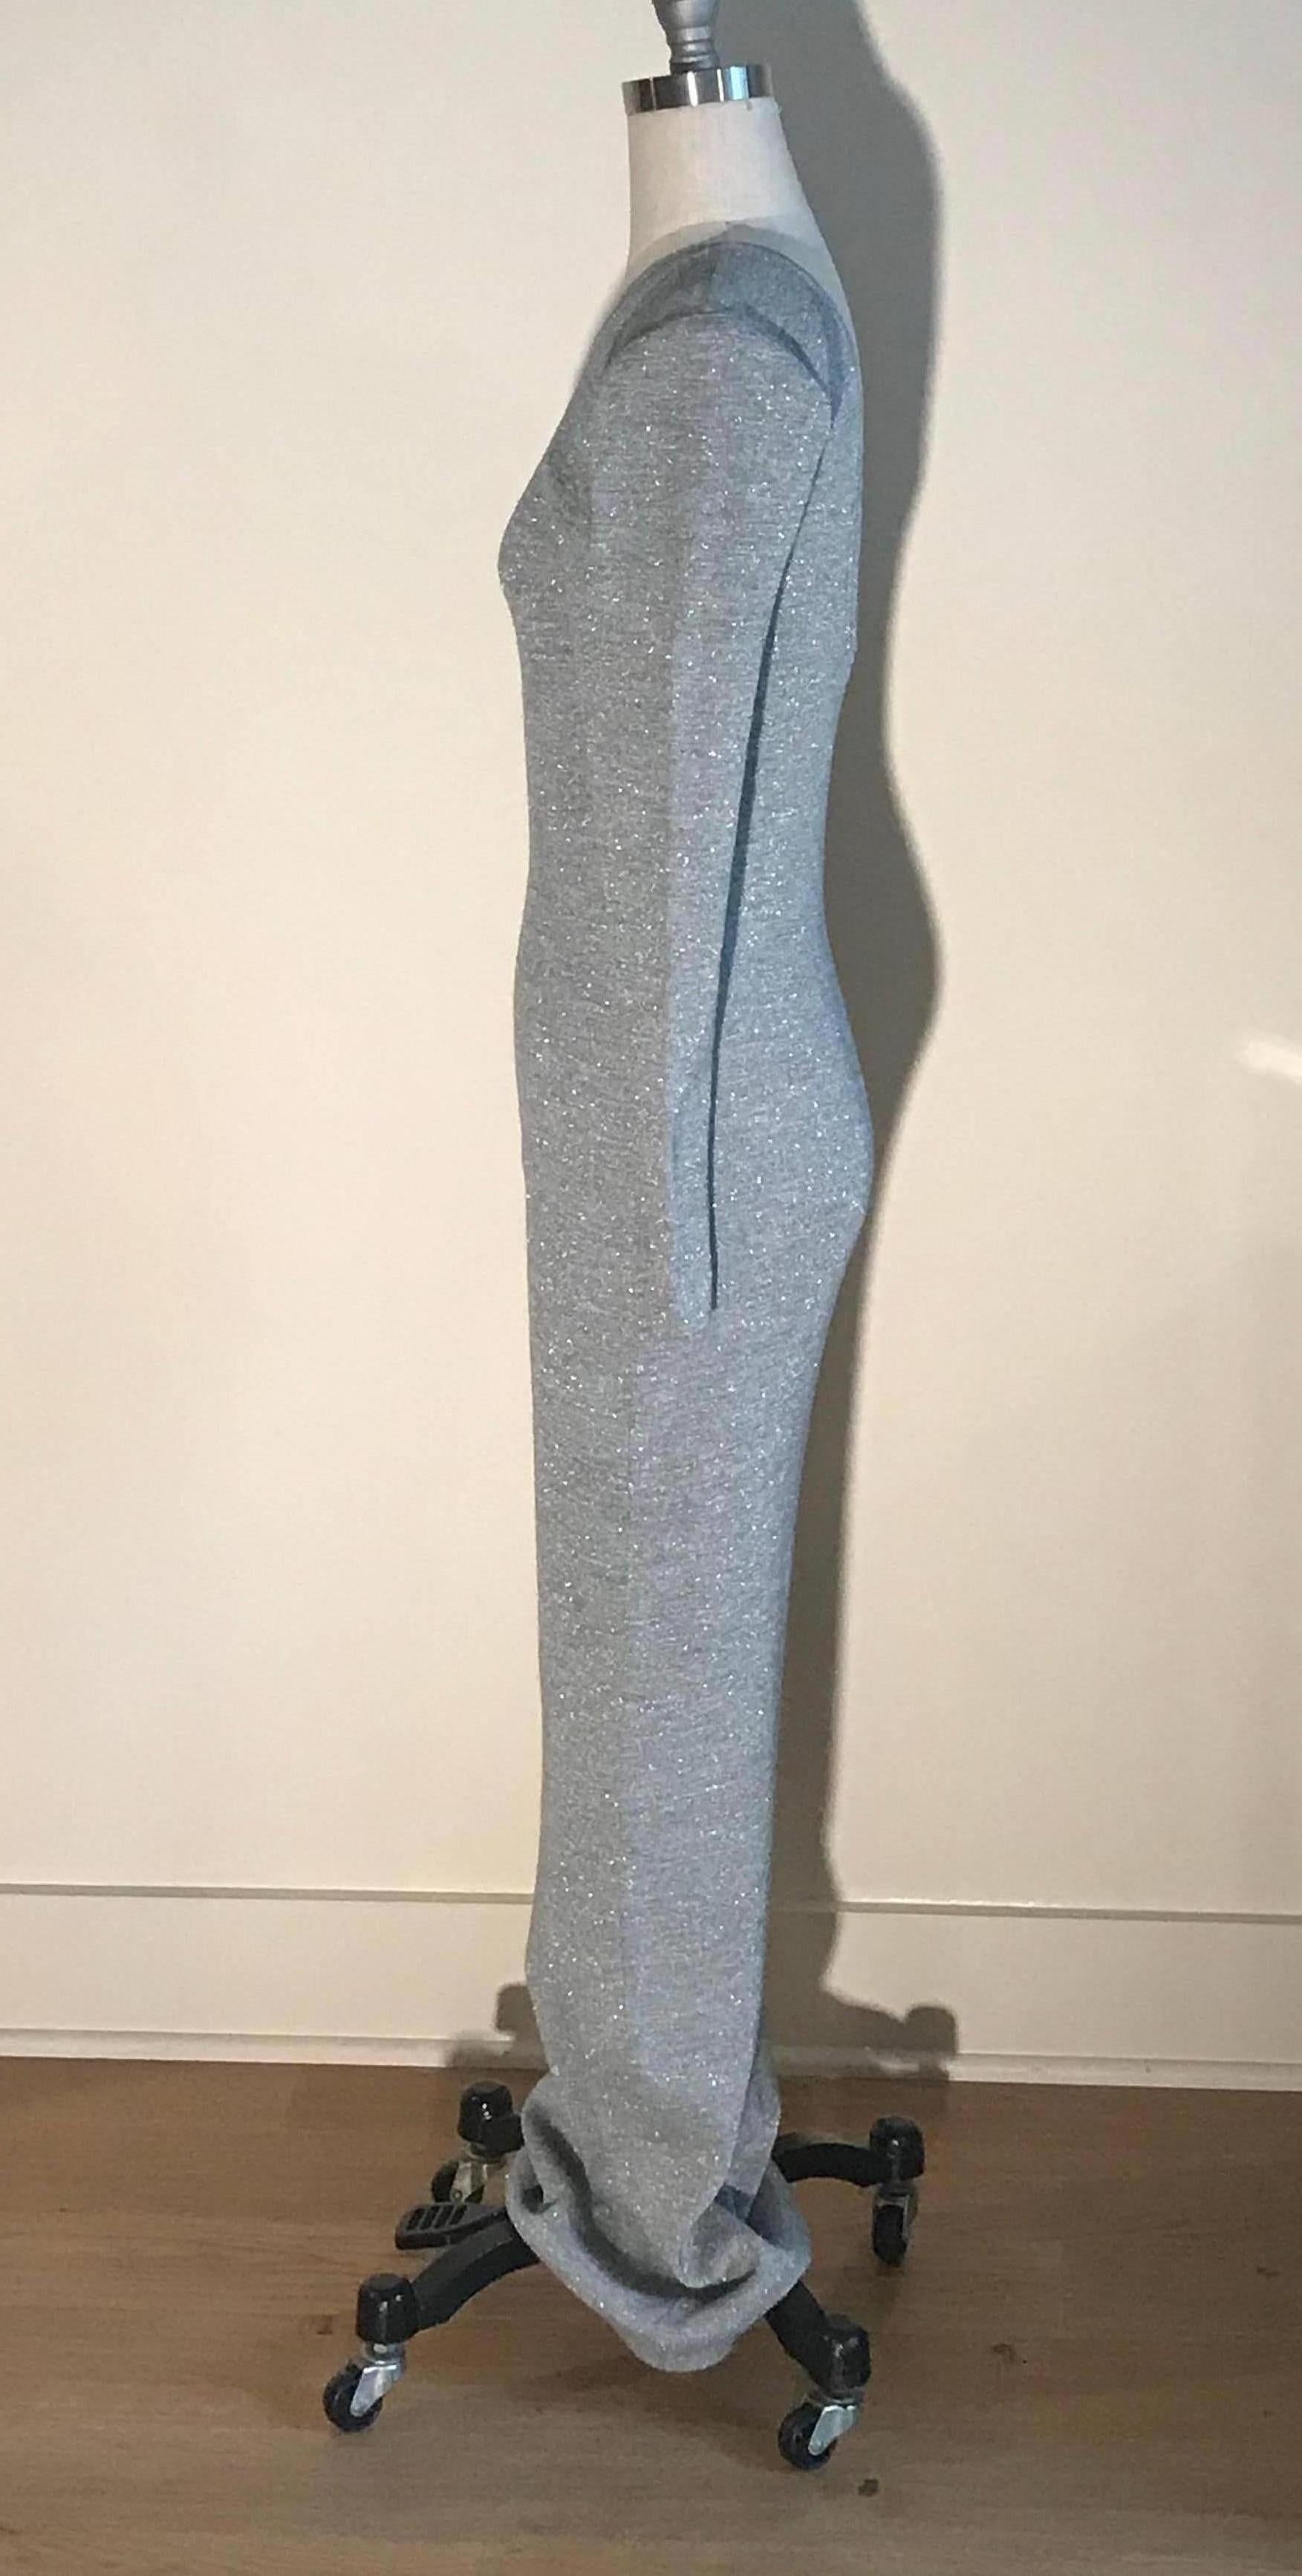 Patrick Kelly metallic silver grey thin rib knit maxi length sweater dress. Long sleeves and scoop back. Pull on. Light padding at shoulders. Purchased from an auction of items from the Atelier of Patrick Kelly.

Cotton unknown, feels like